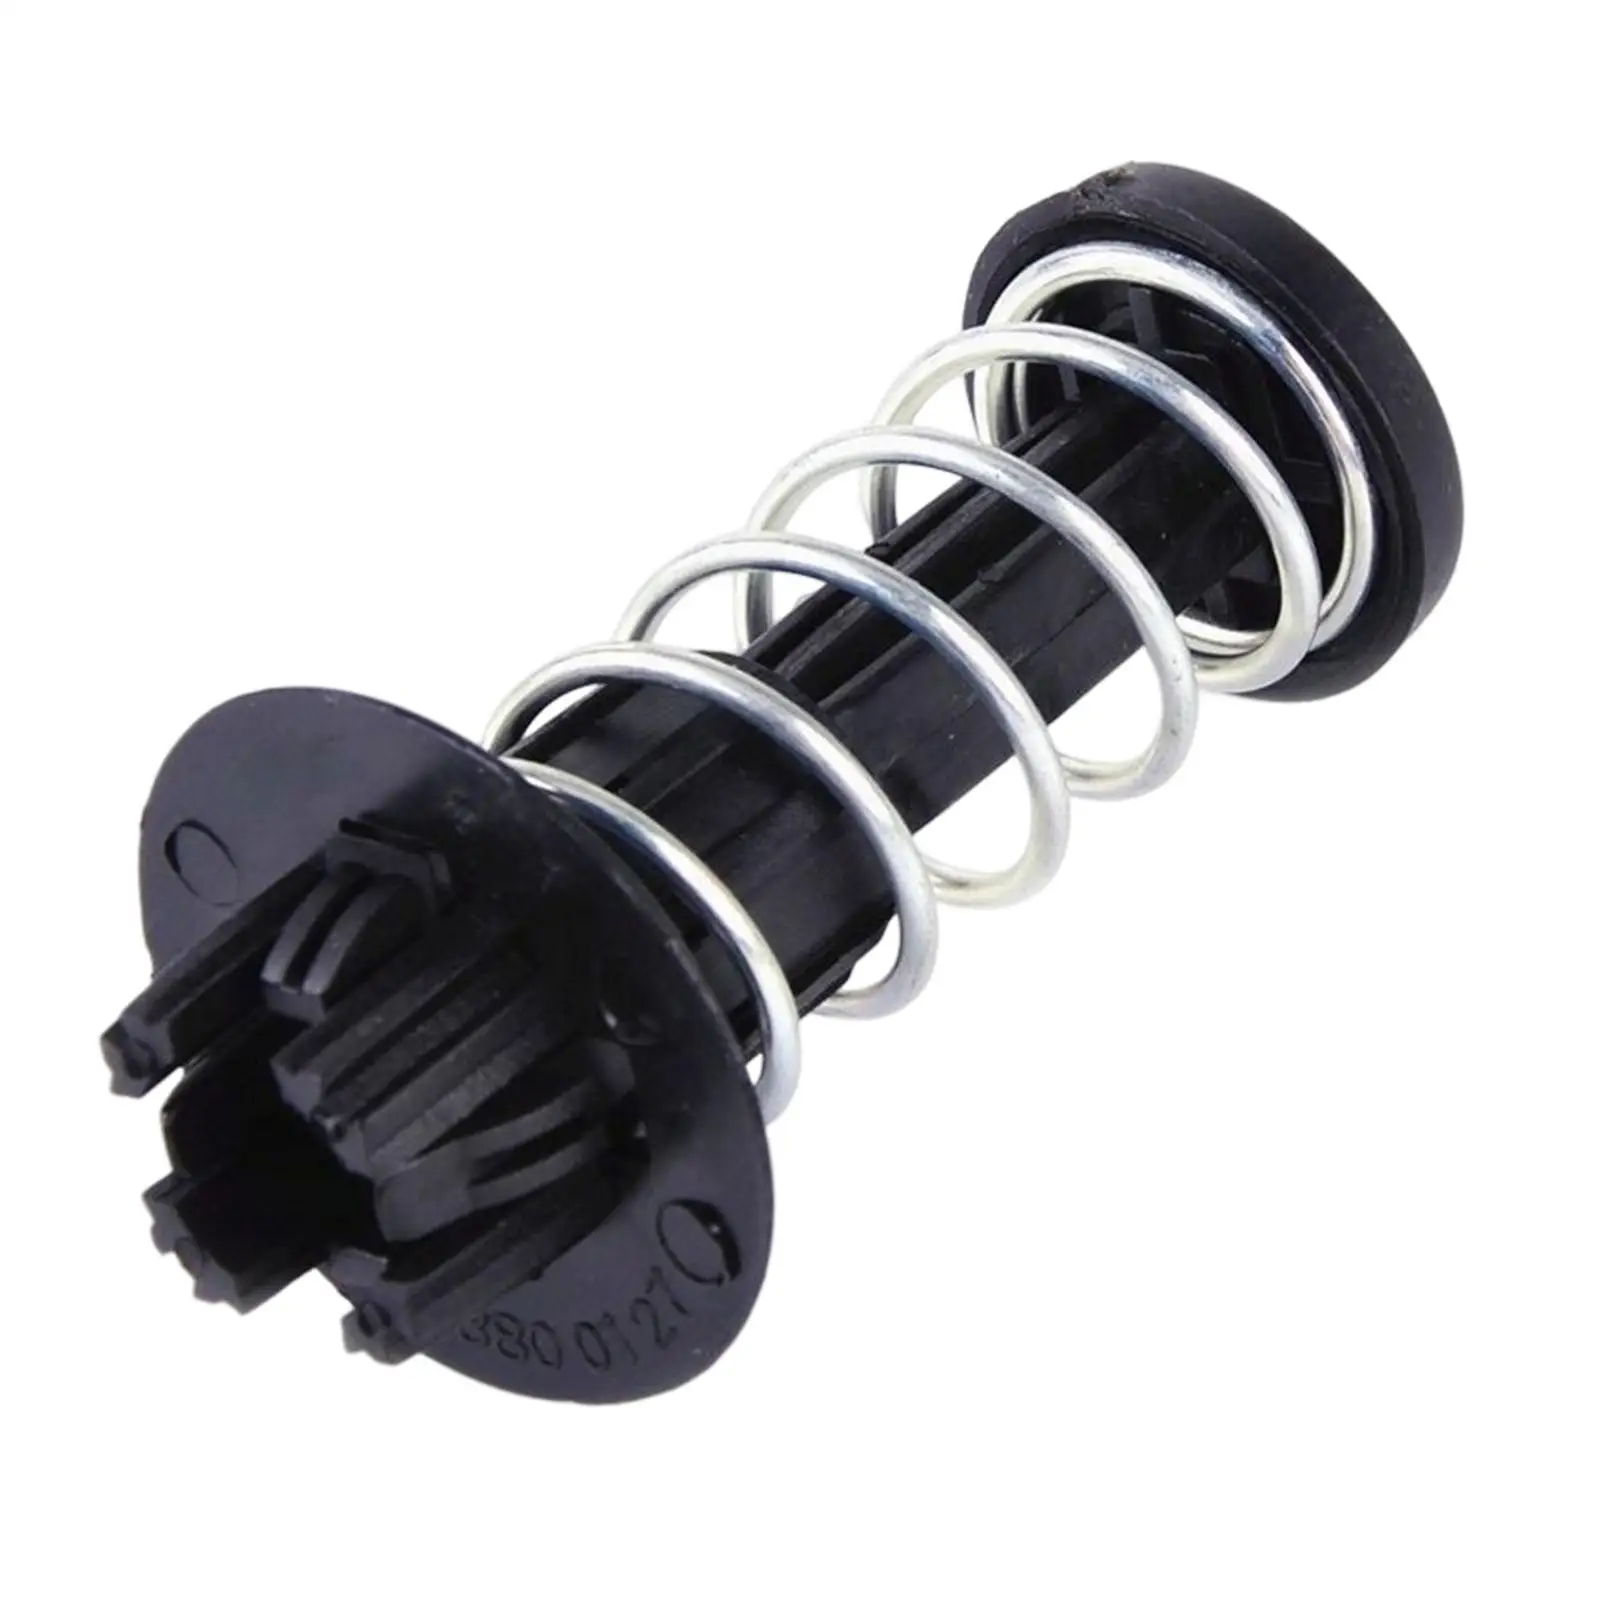 Automobile Hood Spring 2048800227 Replacement Accessories Durable Black Color Easily Install